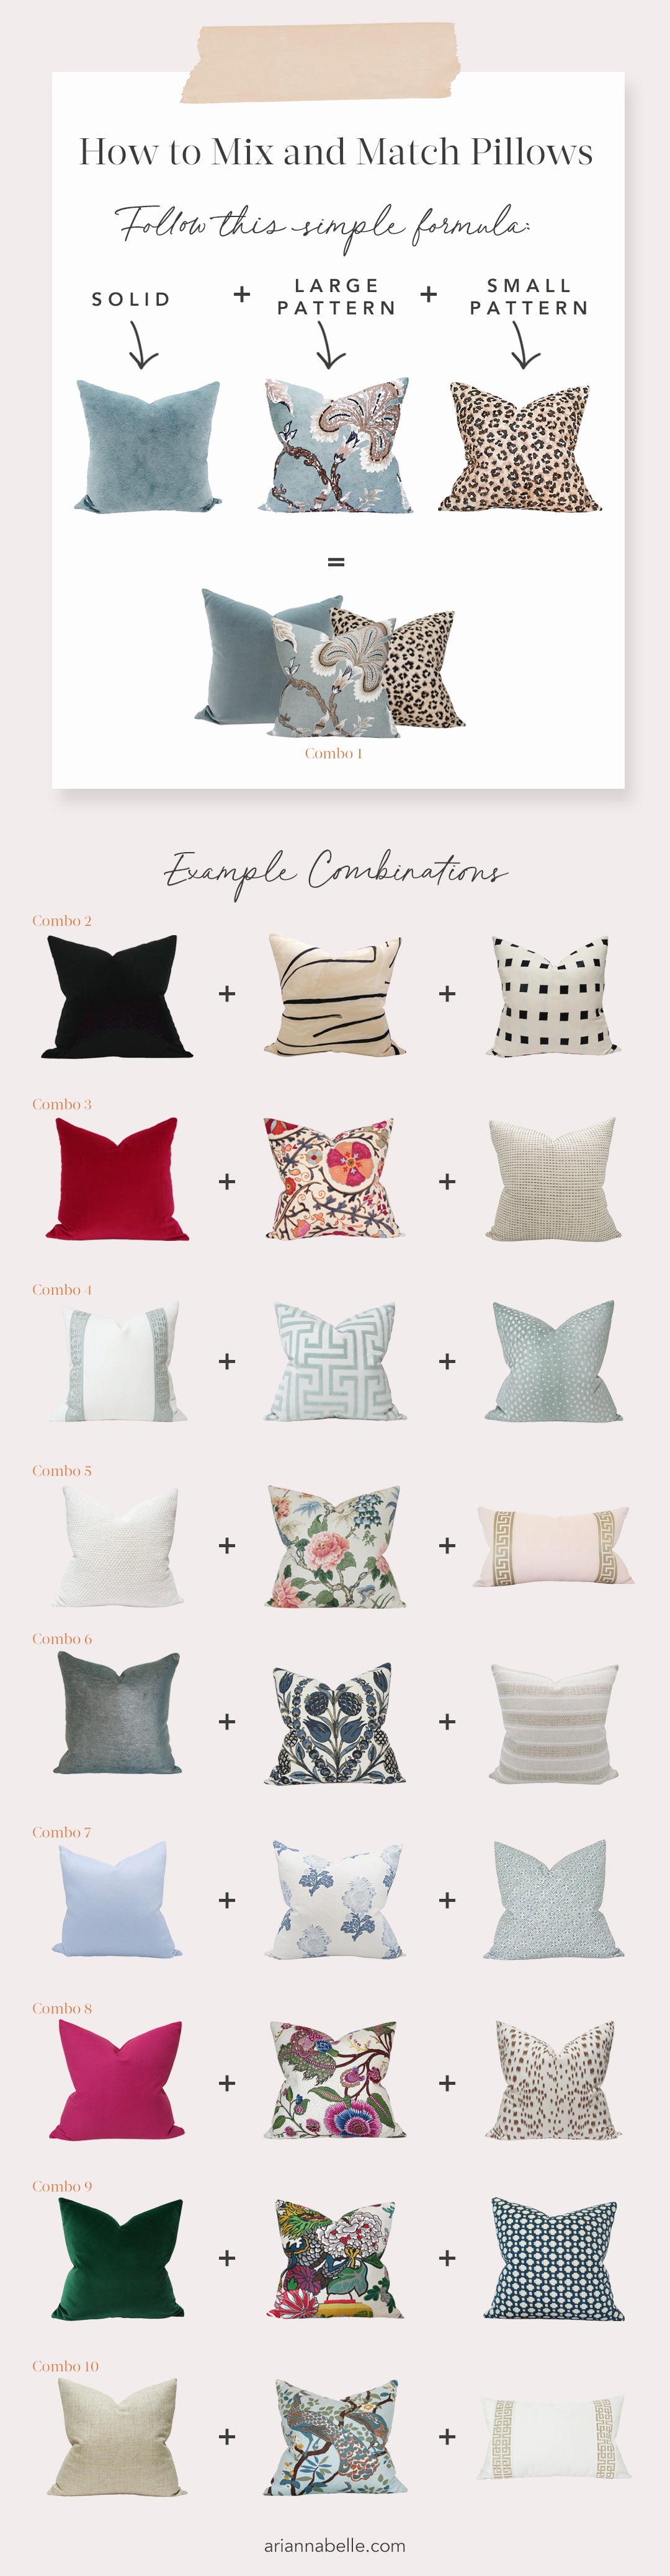 How to Mix and Match Pillows - A Simple and Easy Formula | Arianna Belle Blog